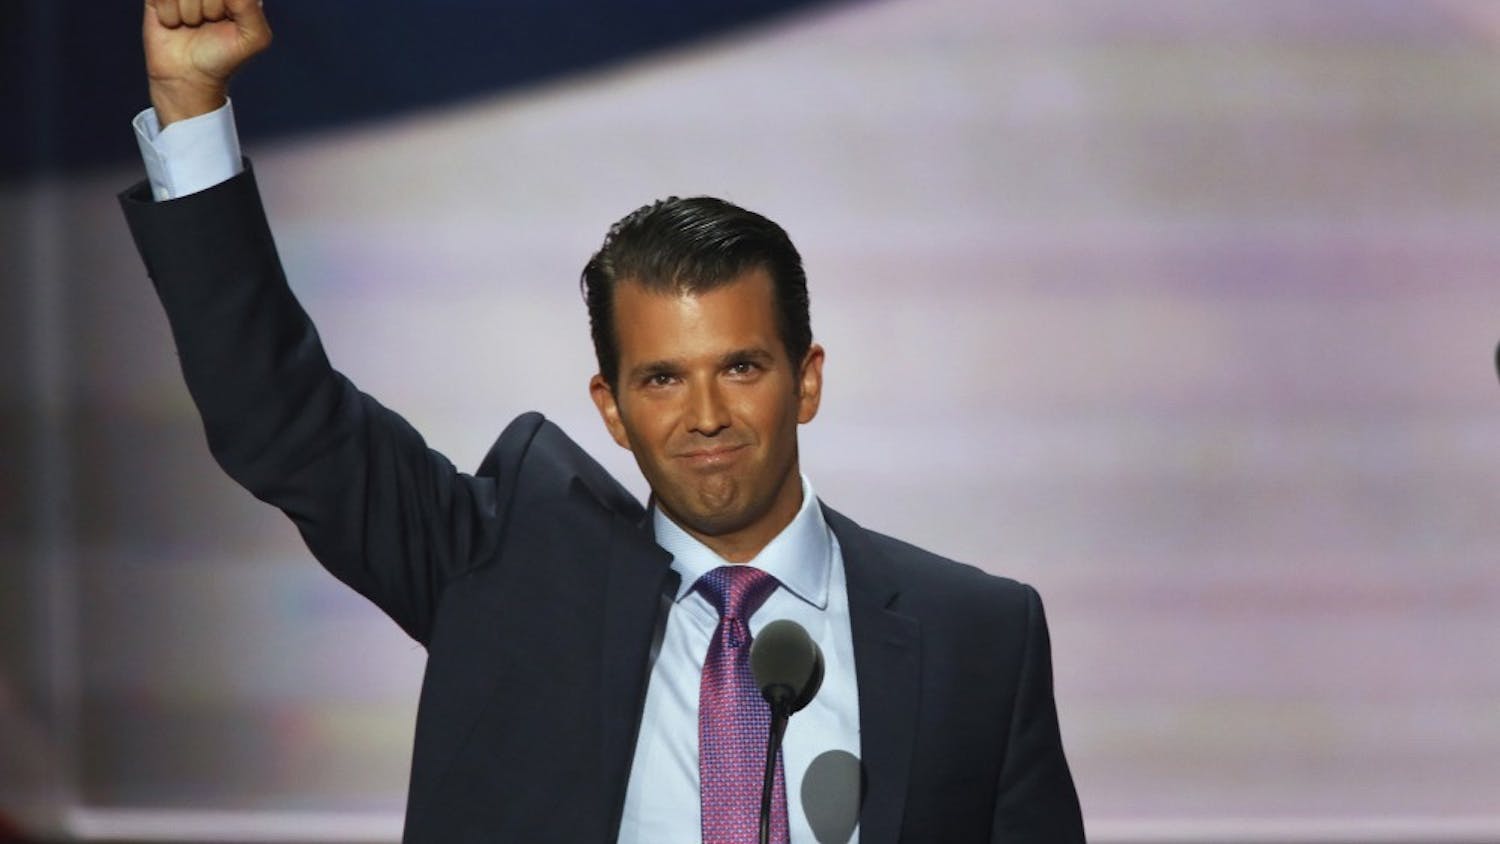 Donald Trump Jr., Donald Trump's son, speaks on the second day of the Republican National Convention on Tuesday, July 19, 2016, at Quicken Loans Arena in Cleveland. (Carolyn Cole/Los Angeles Times/TNS)